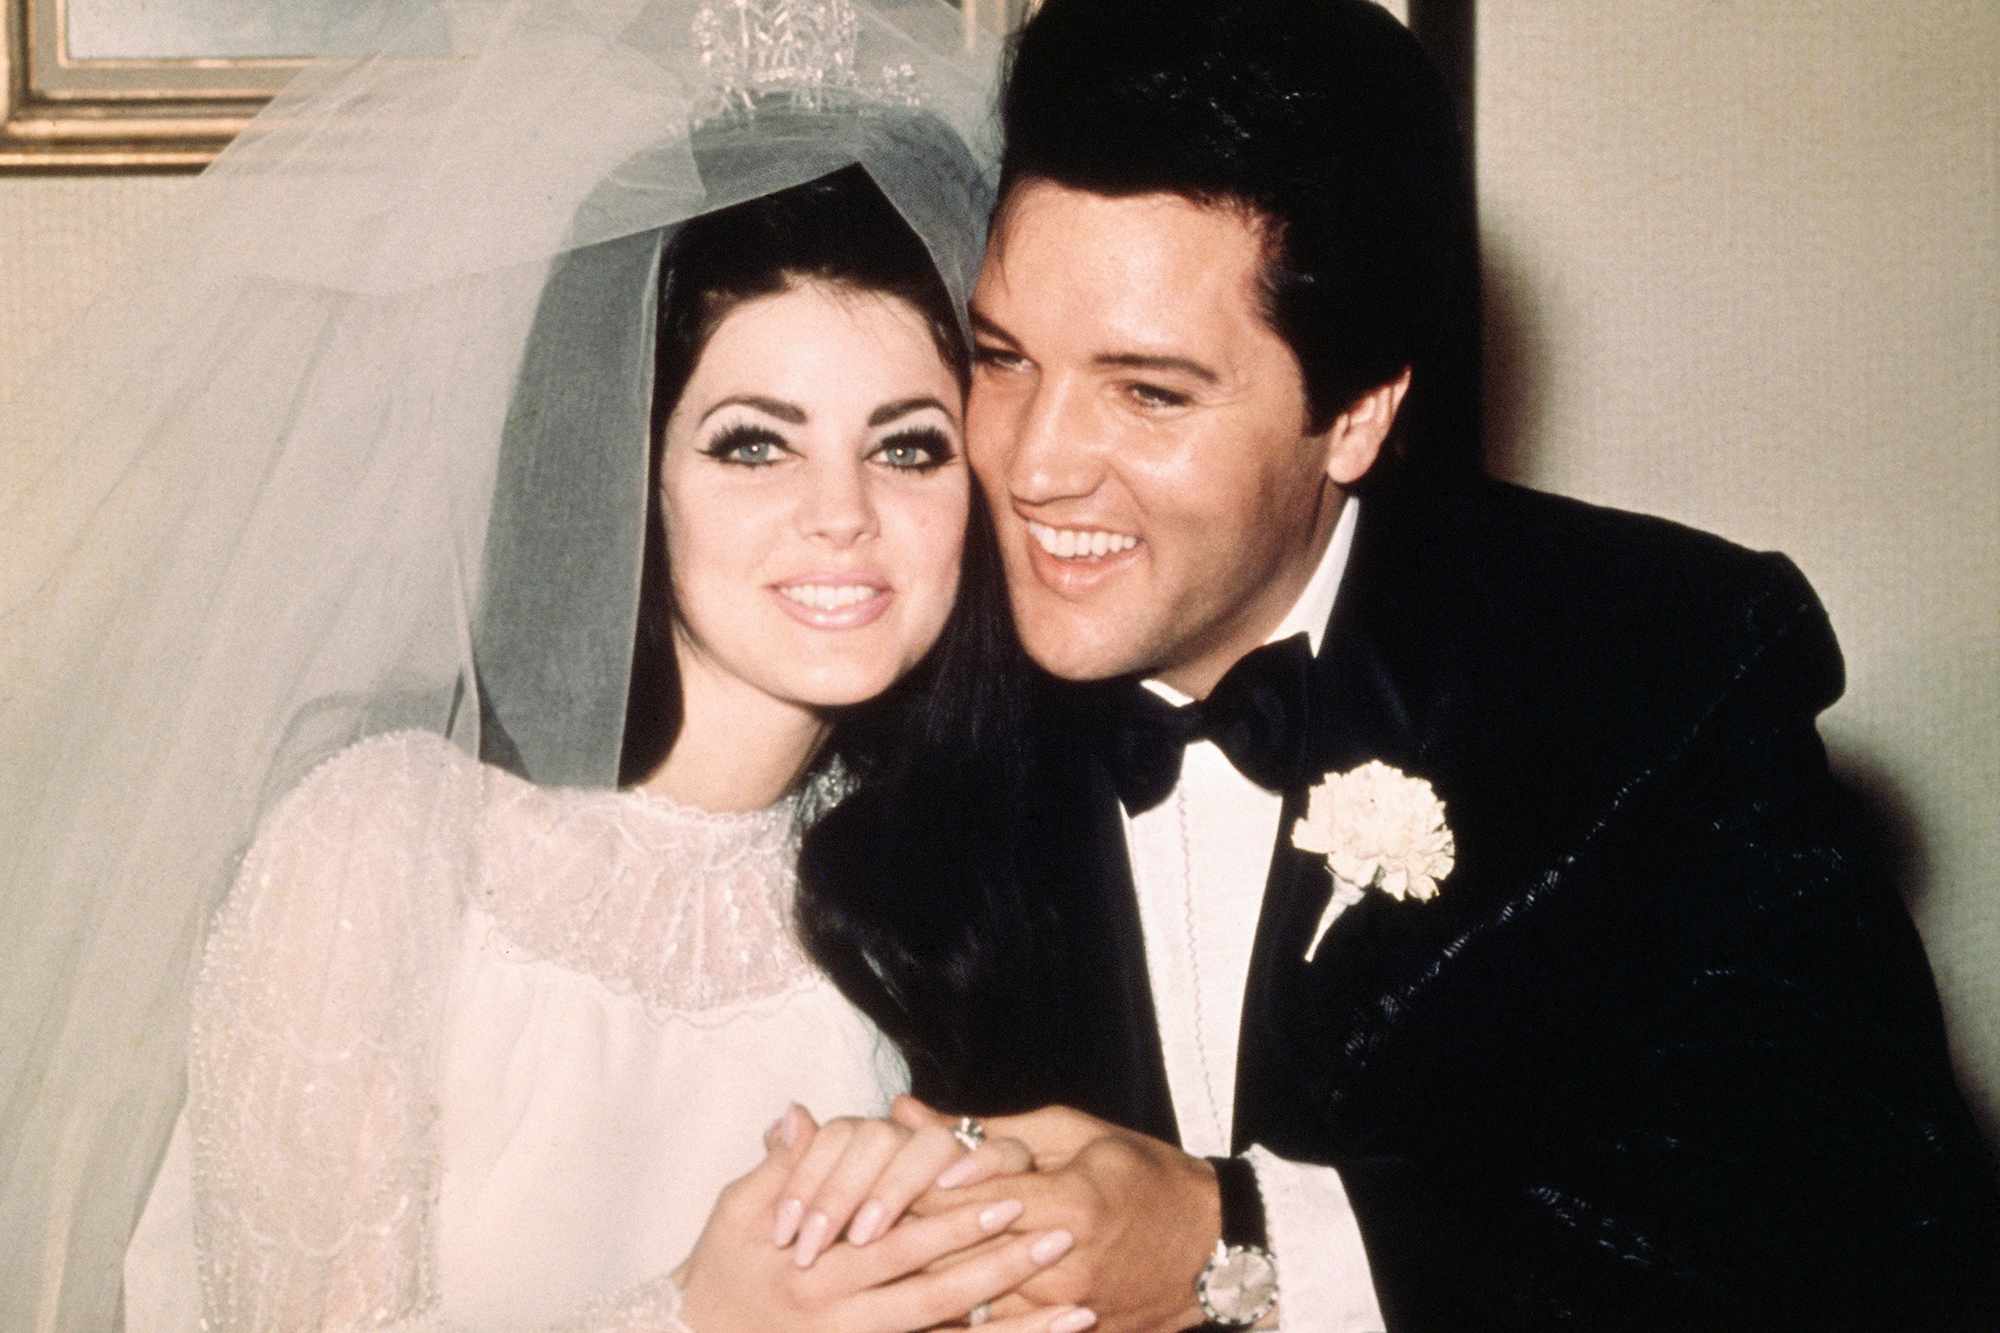 Priscilla Presley Bought Her '60s Wedding Dress in Disguise — Here’s Every Detail About the Iconic Gown